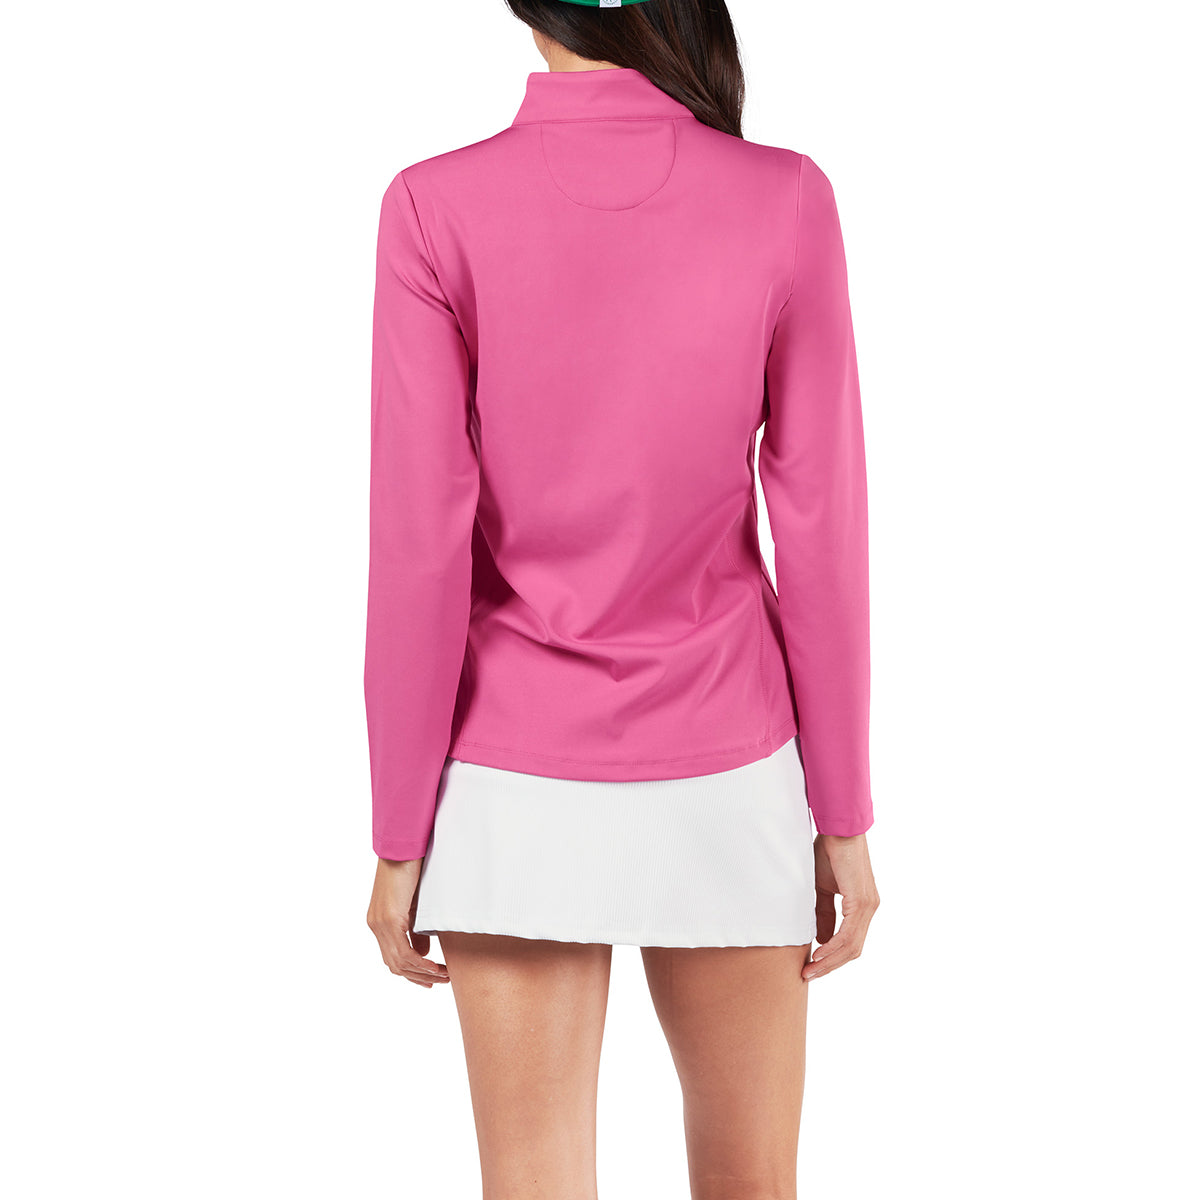 Barstool Golf Women's Quarter-Zip-Pullovers-Fore Play-Barstool Sports